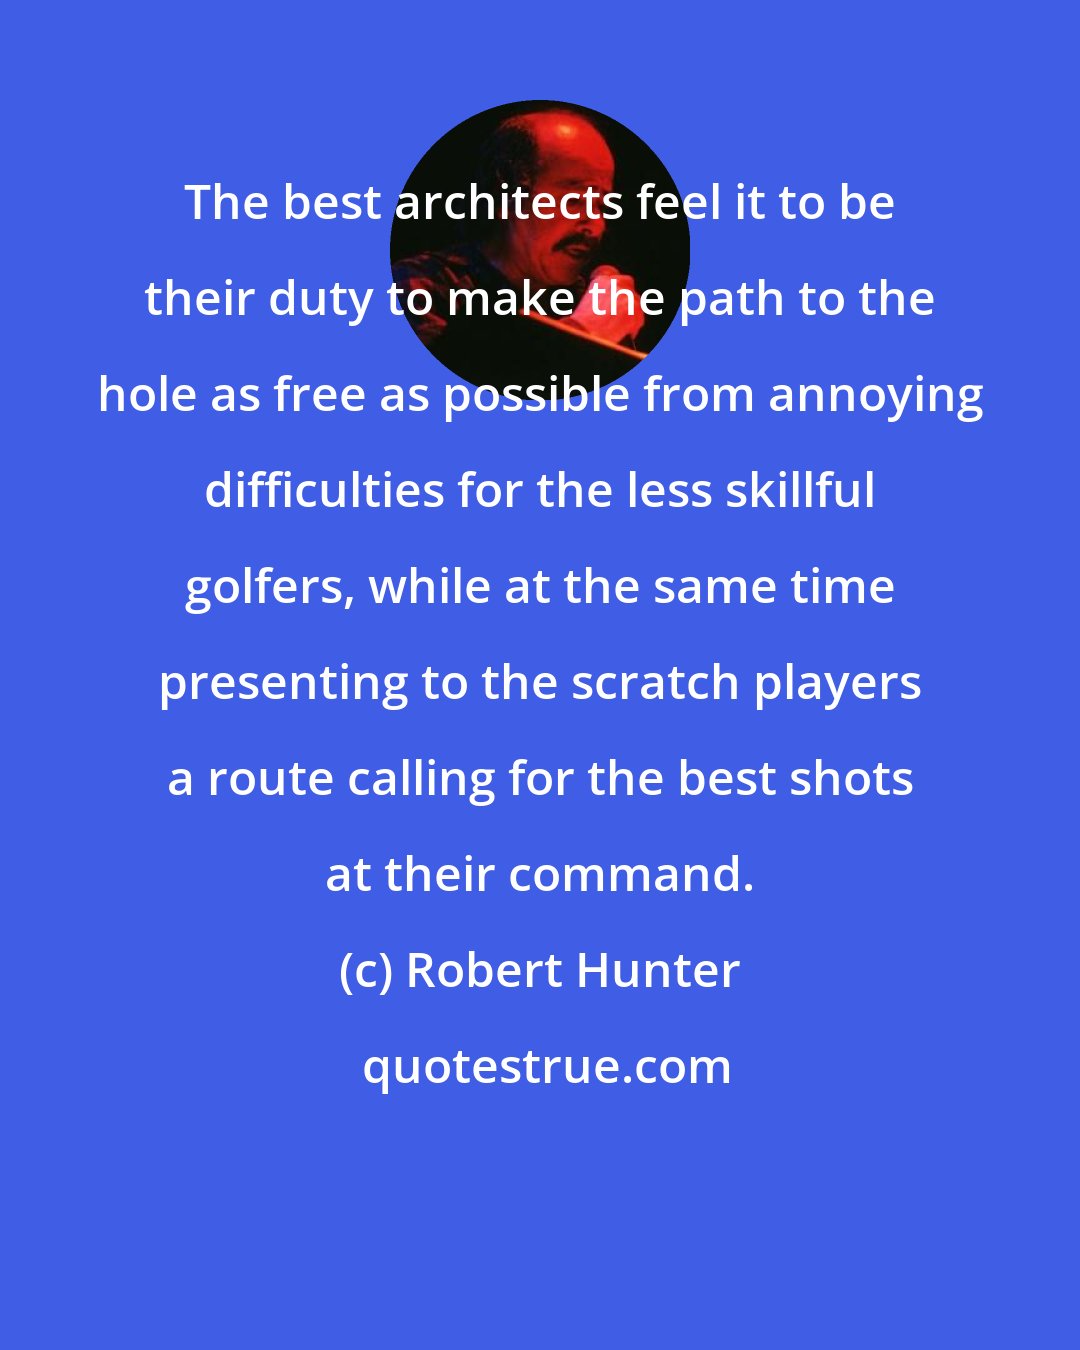 Robert Hunter: The best architects feel it to be their duty to make the path to the hole as free as possible from annoying difficulties for the less skillful golfers, while at the same time presenting to the scratch players a route calling for the best shots at their command.